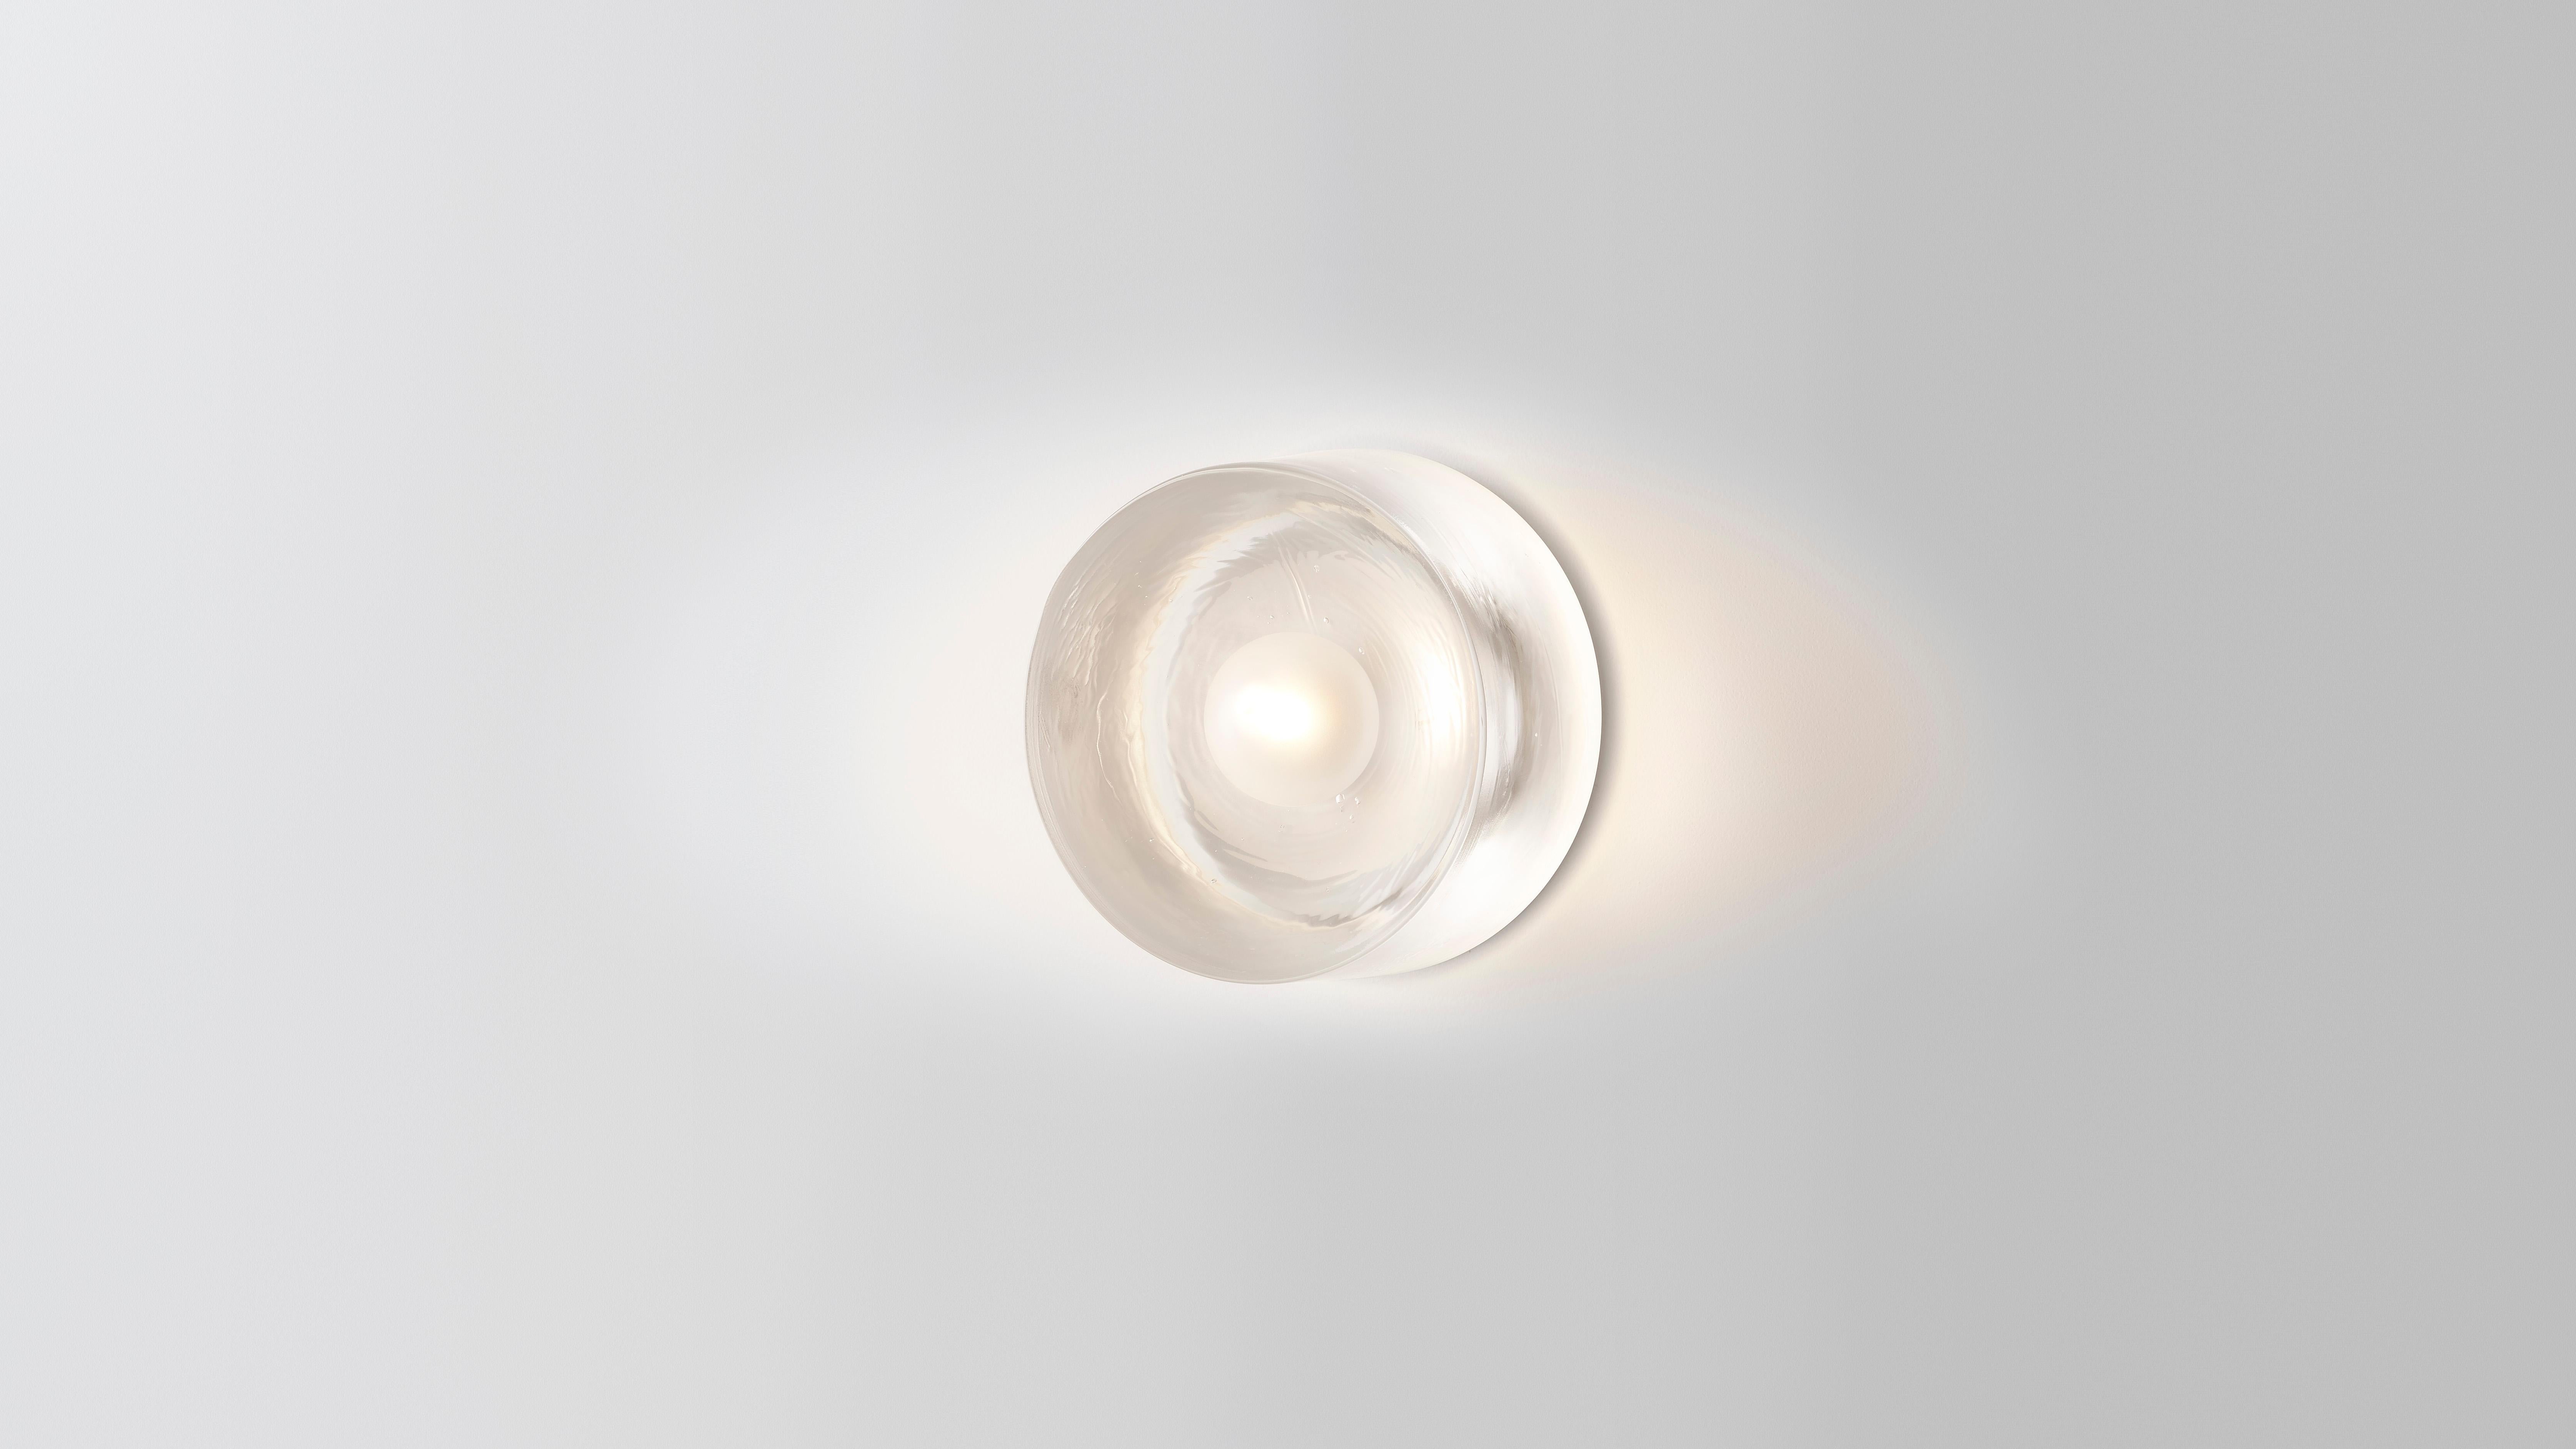 Anton mini in glass by Volker Haug 
Anton series
Dimensions: Ø 13 x D 8 cm.
Materials: Cast glass
Backing plate: Polished
Lamp: G9 LED (240V / 120V US). 12V option available
Glass bulb: 4.5 cm ø, Frosted
Weight: 2kg.

The Glass Anton has a diameter